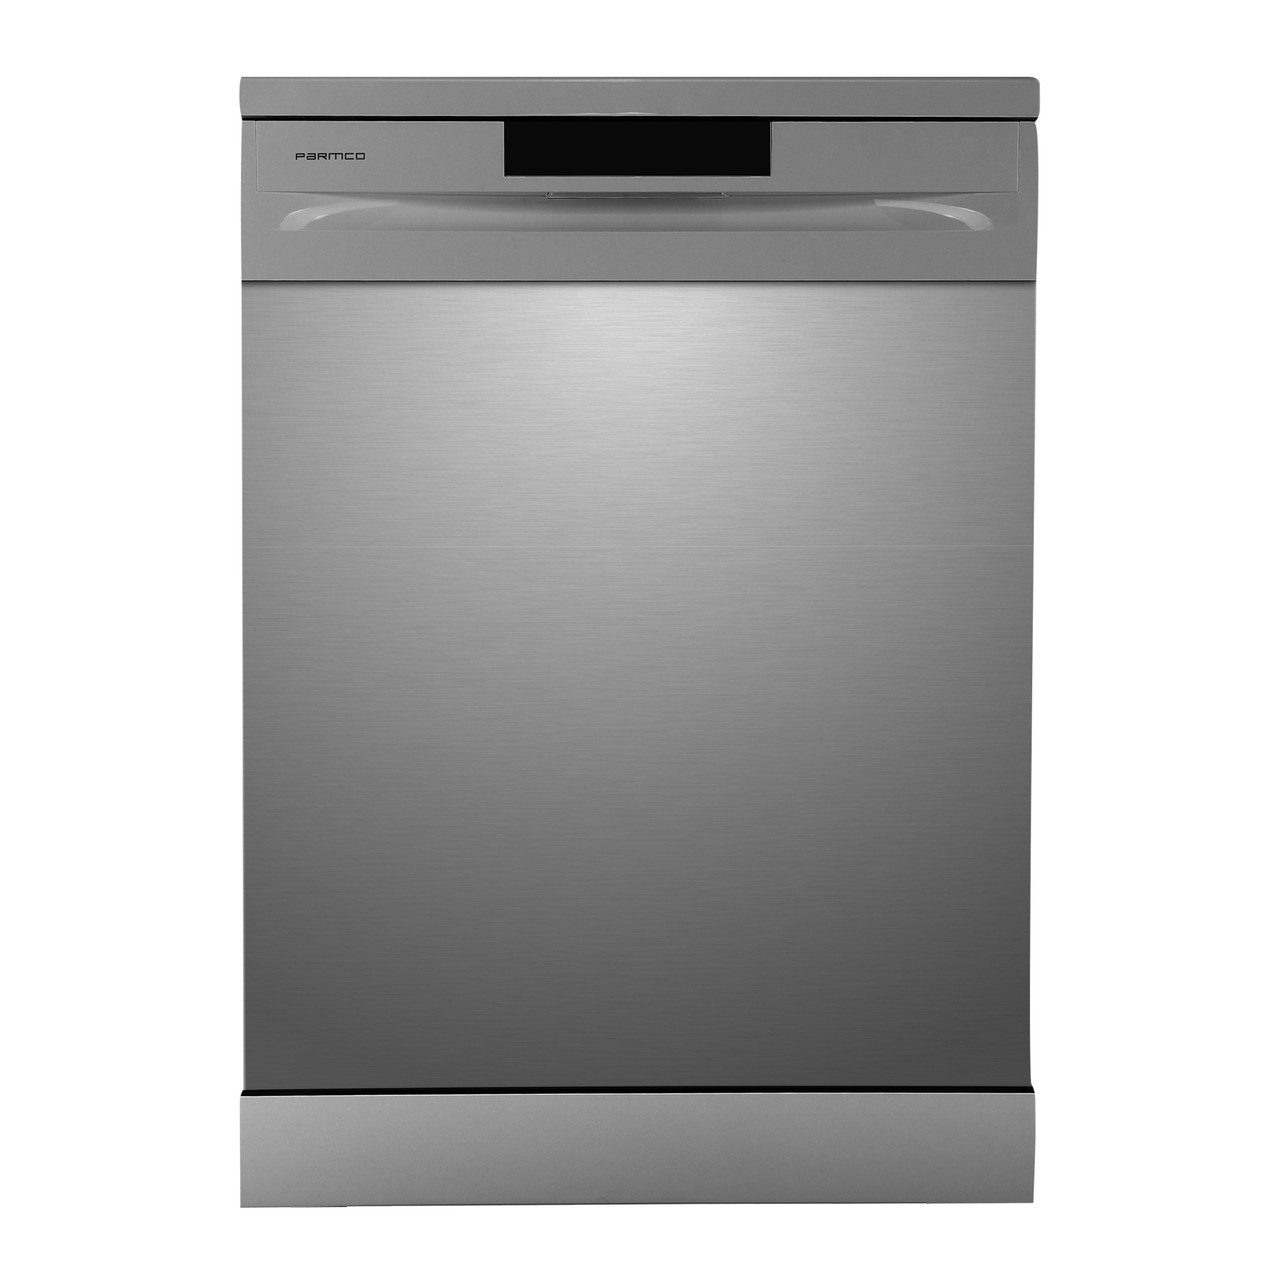 Freestanding　Betta　Place　Dishwasher　Parmco　Electrical　15　S/Steel